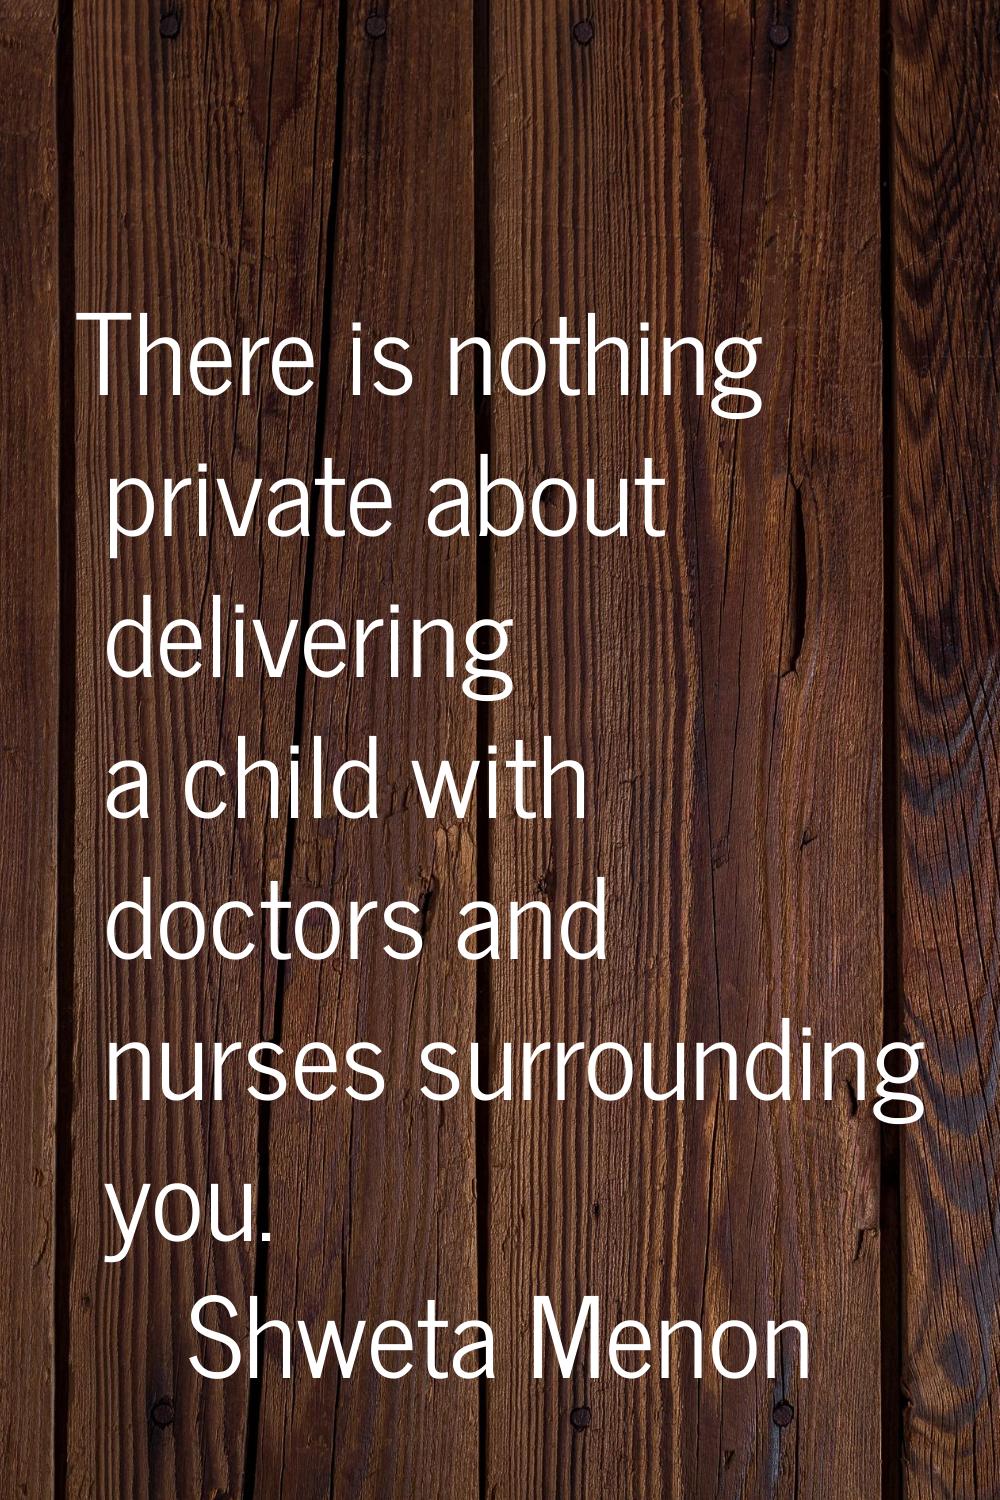 There is nothing private about delivering a child with doctors and nurses surrounding you.